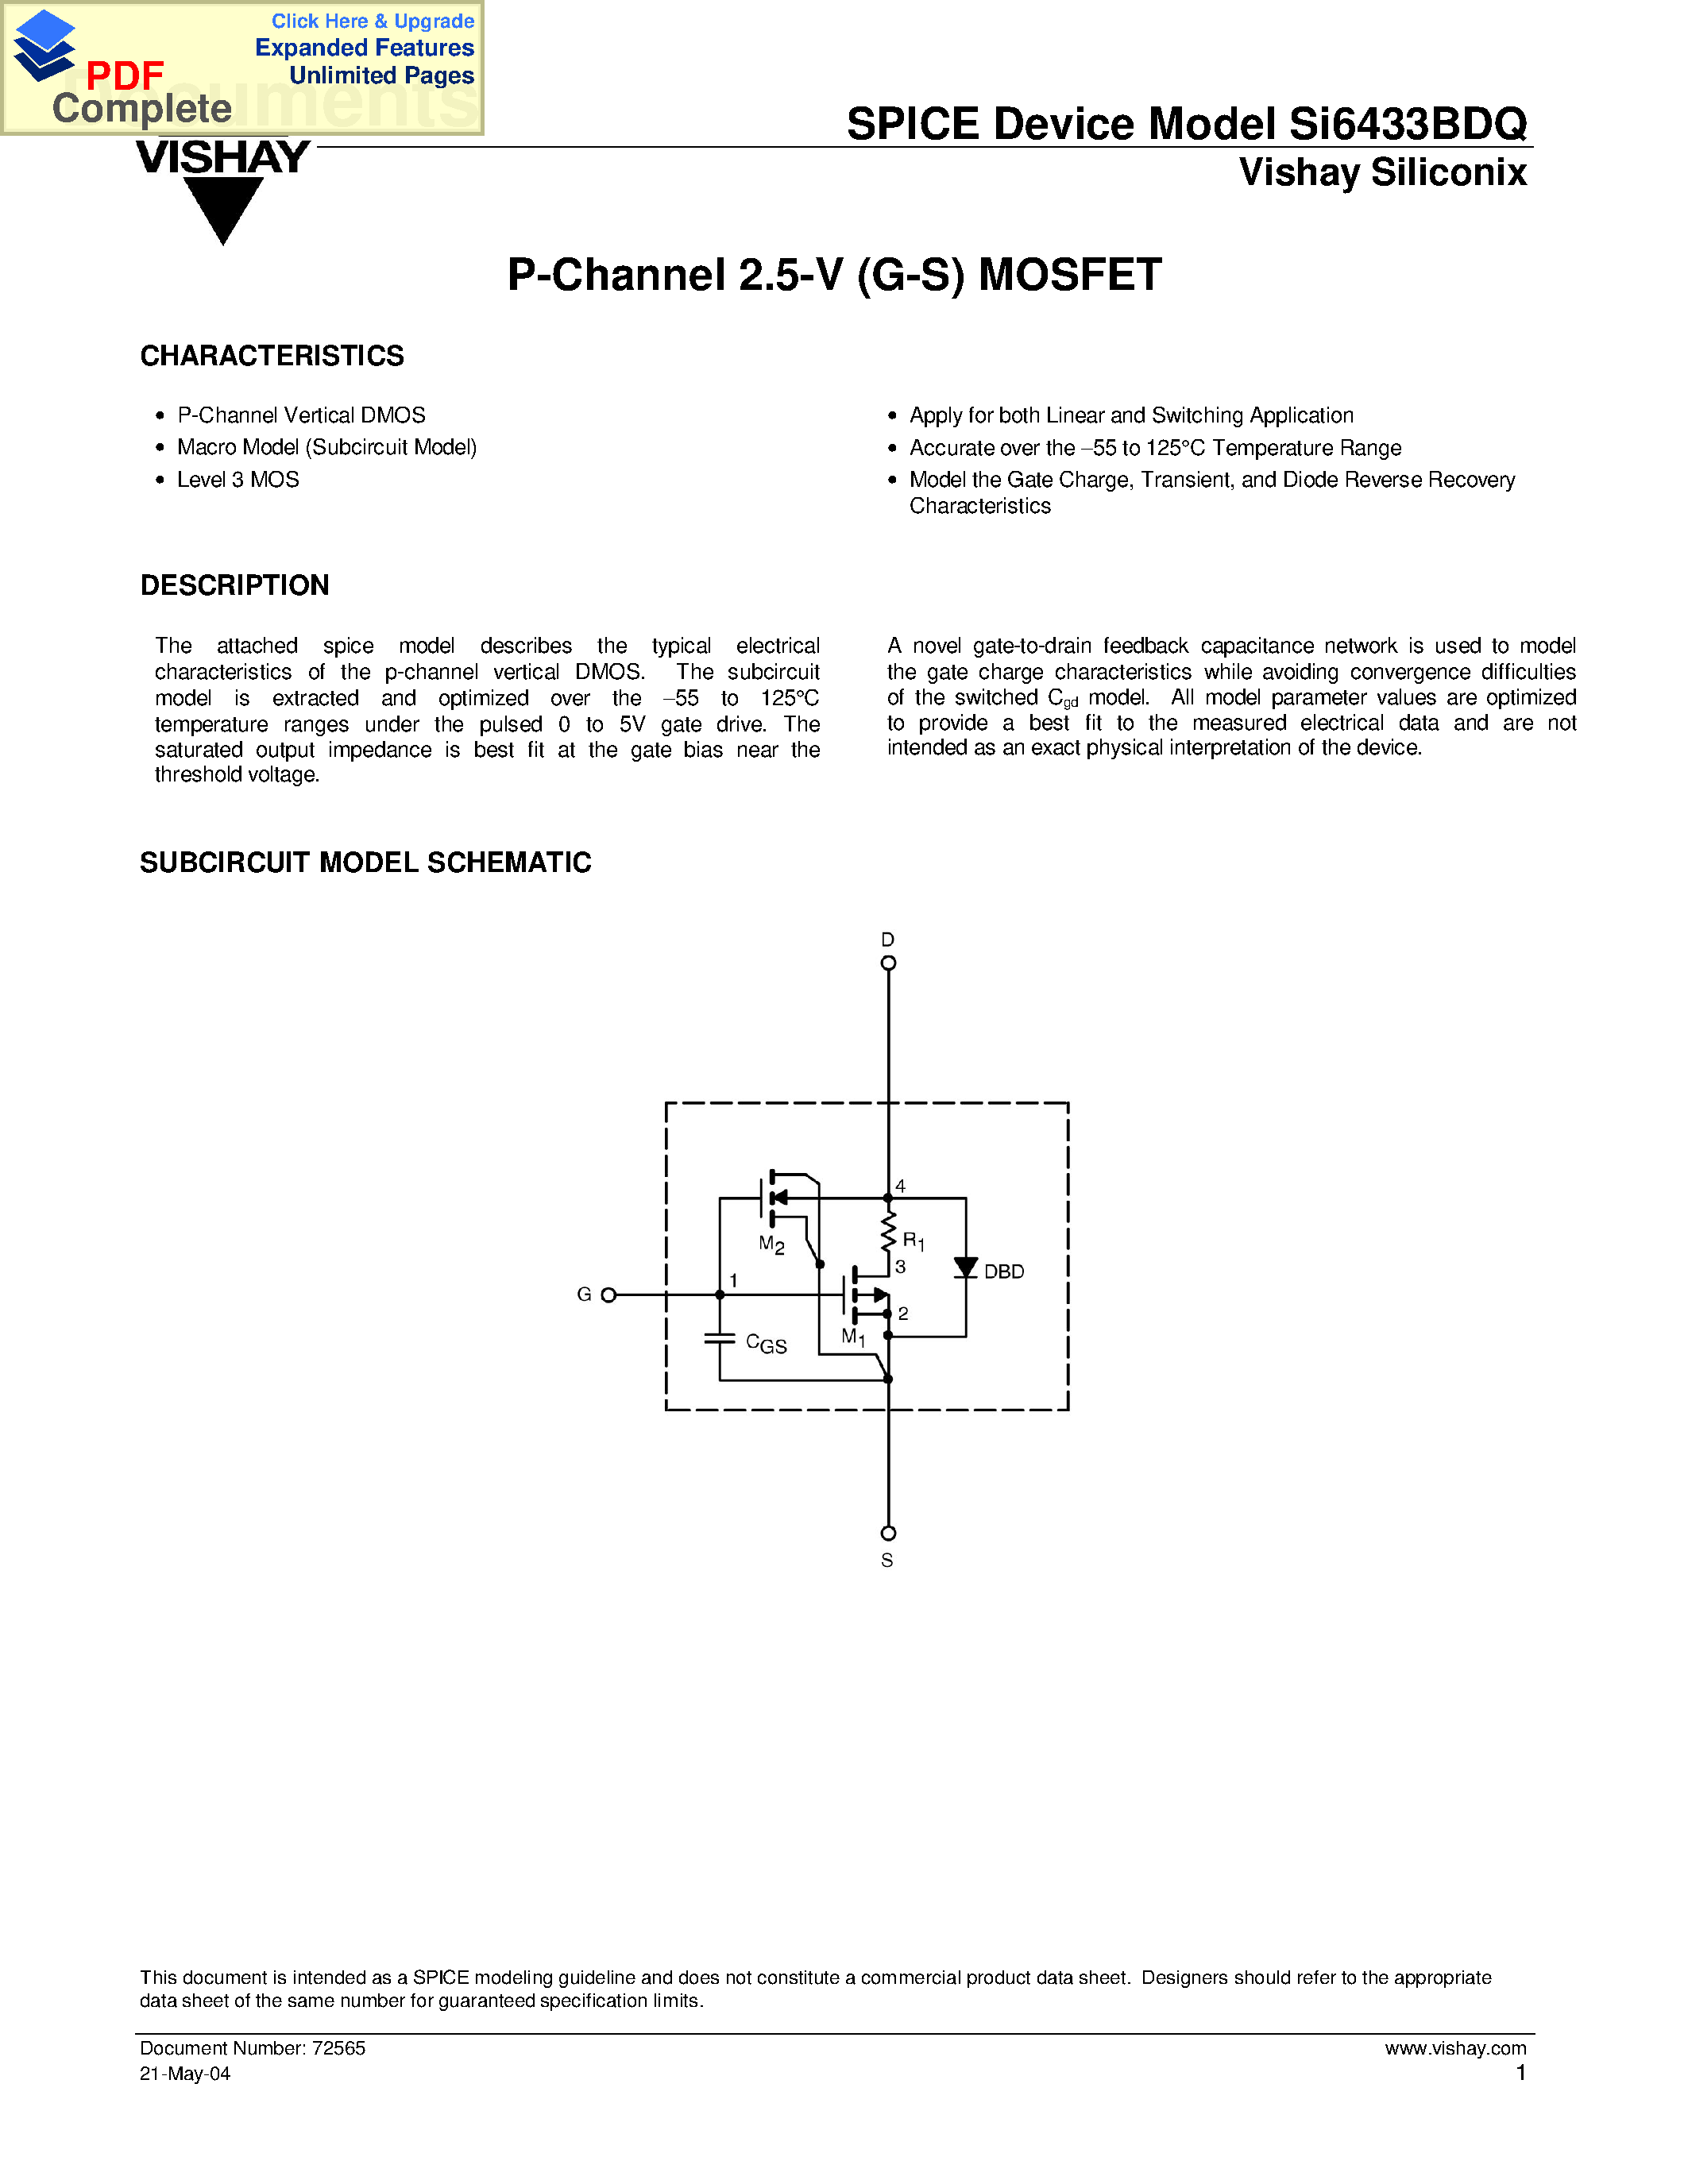 Даташит SI6433BDQ - P-Channel 2.5-V (G-S) MOSFET страница 1